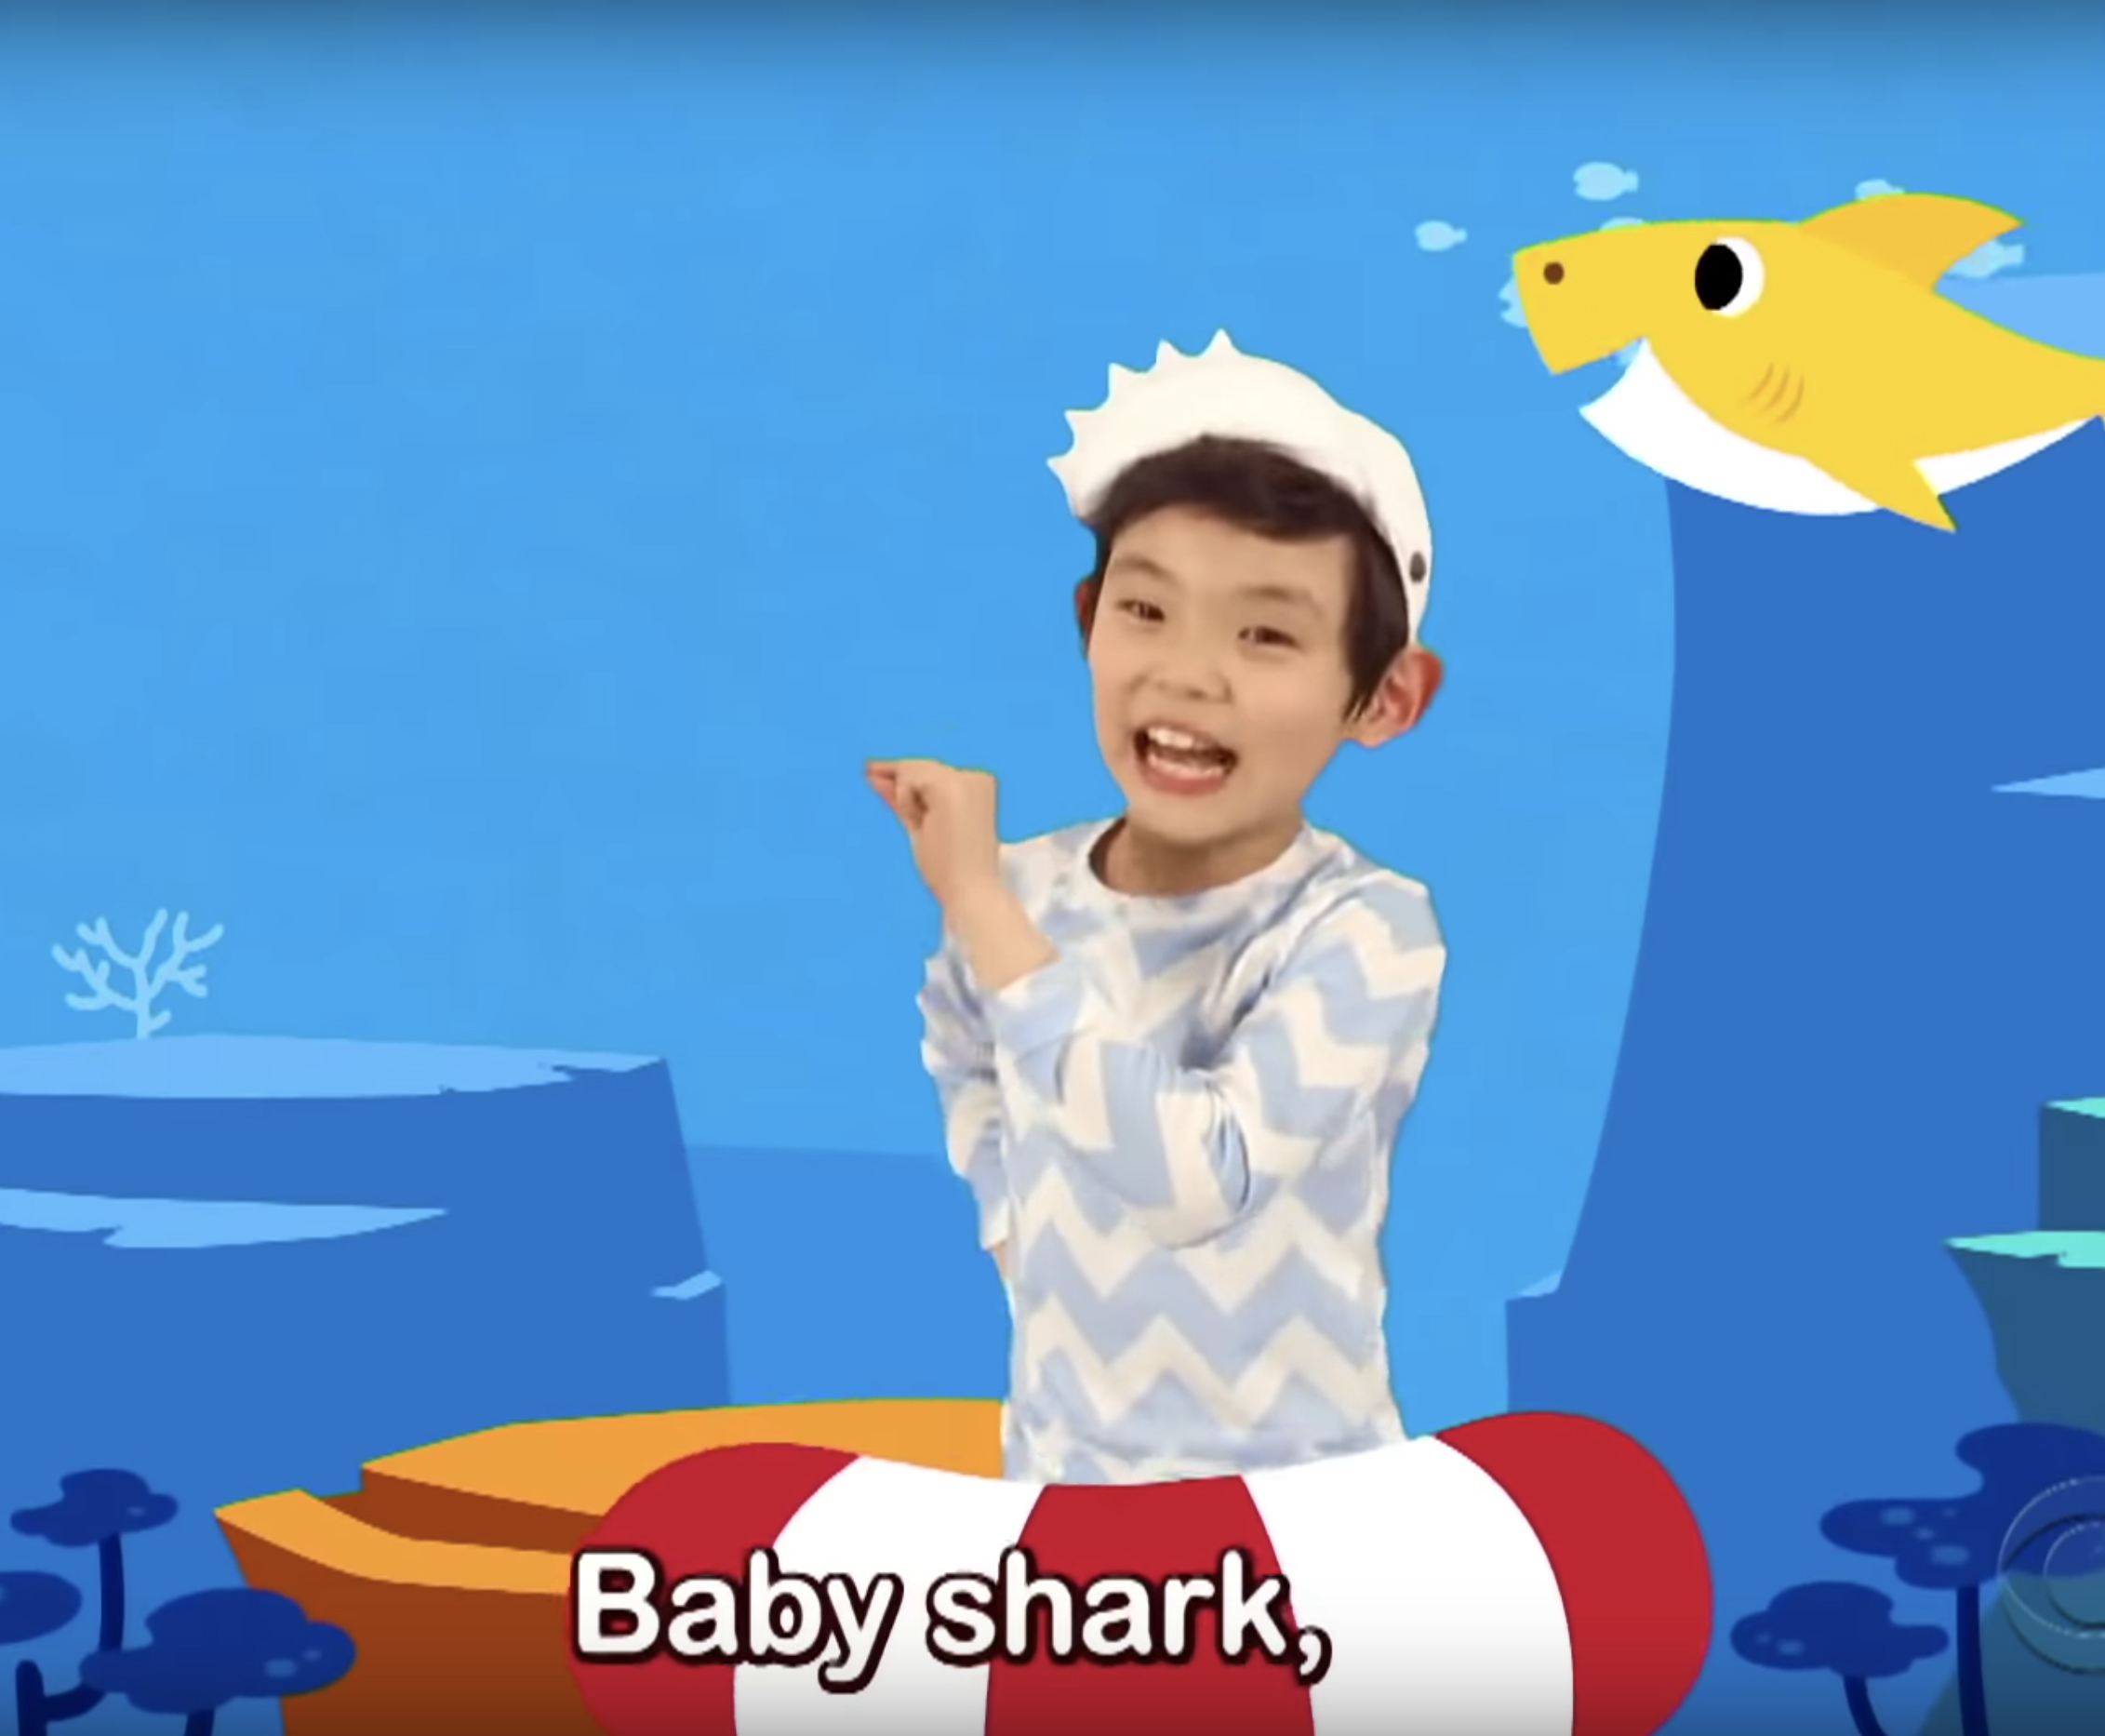 The Star-Studded Version of "Baby Shark" You Might ...